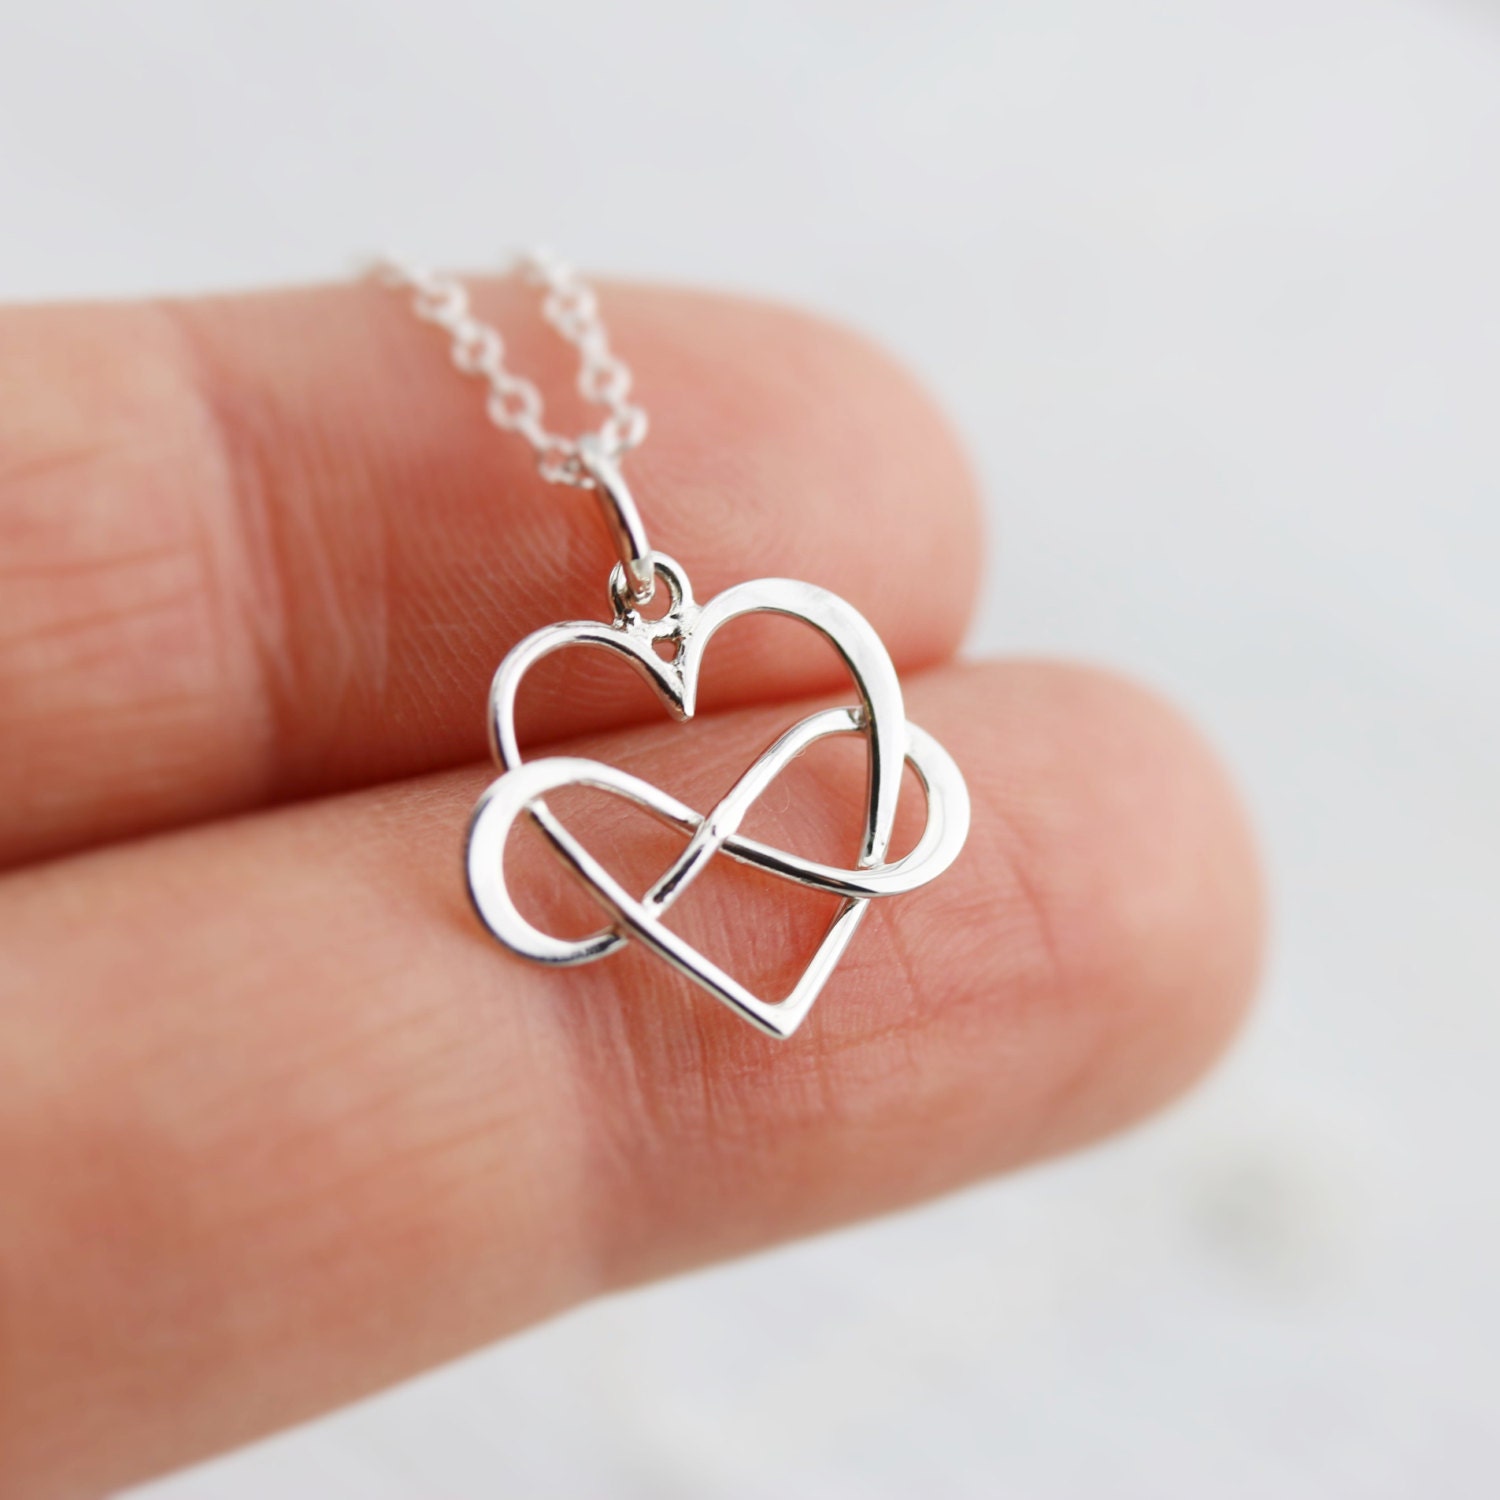 Buy Valentine Day Gift Couple Necklace, Infinity Necklace, 2 Names. 2 Hearts  Personalized Necklaces Silver Infinity Pendant, Two Names. Online in India  - Etsy